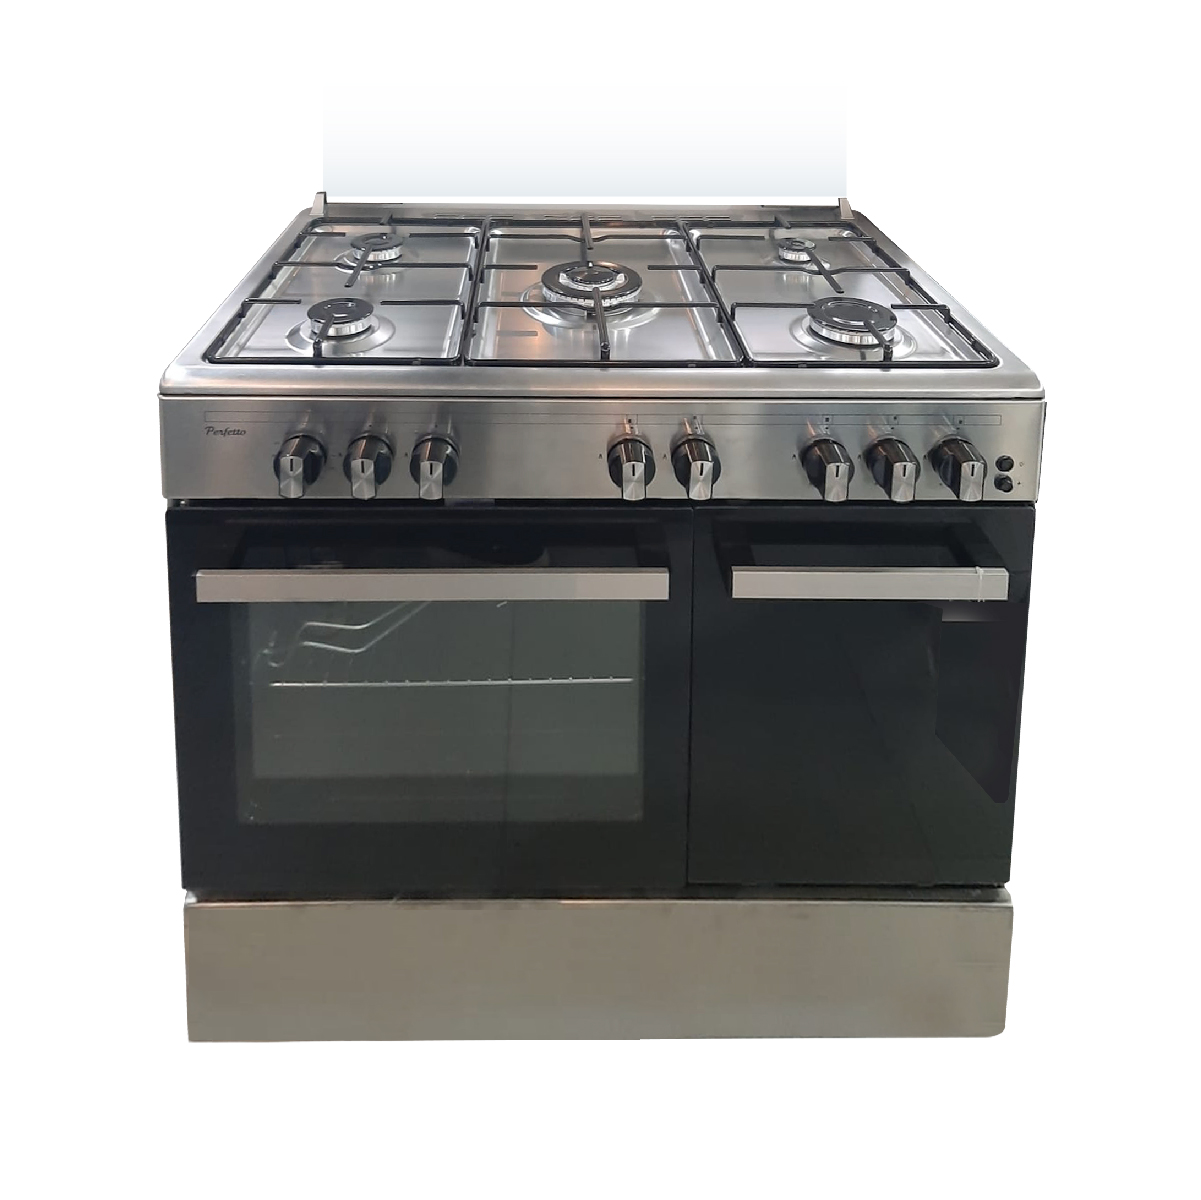 Perfetto 90cm Cooker, 5 Burners, Ignition, Bottle Compartment, Inox, PER95SS